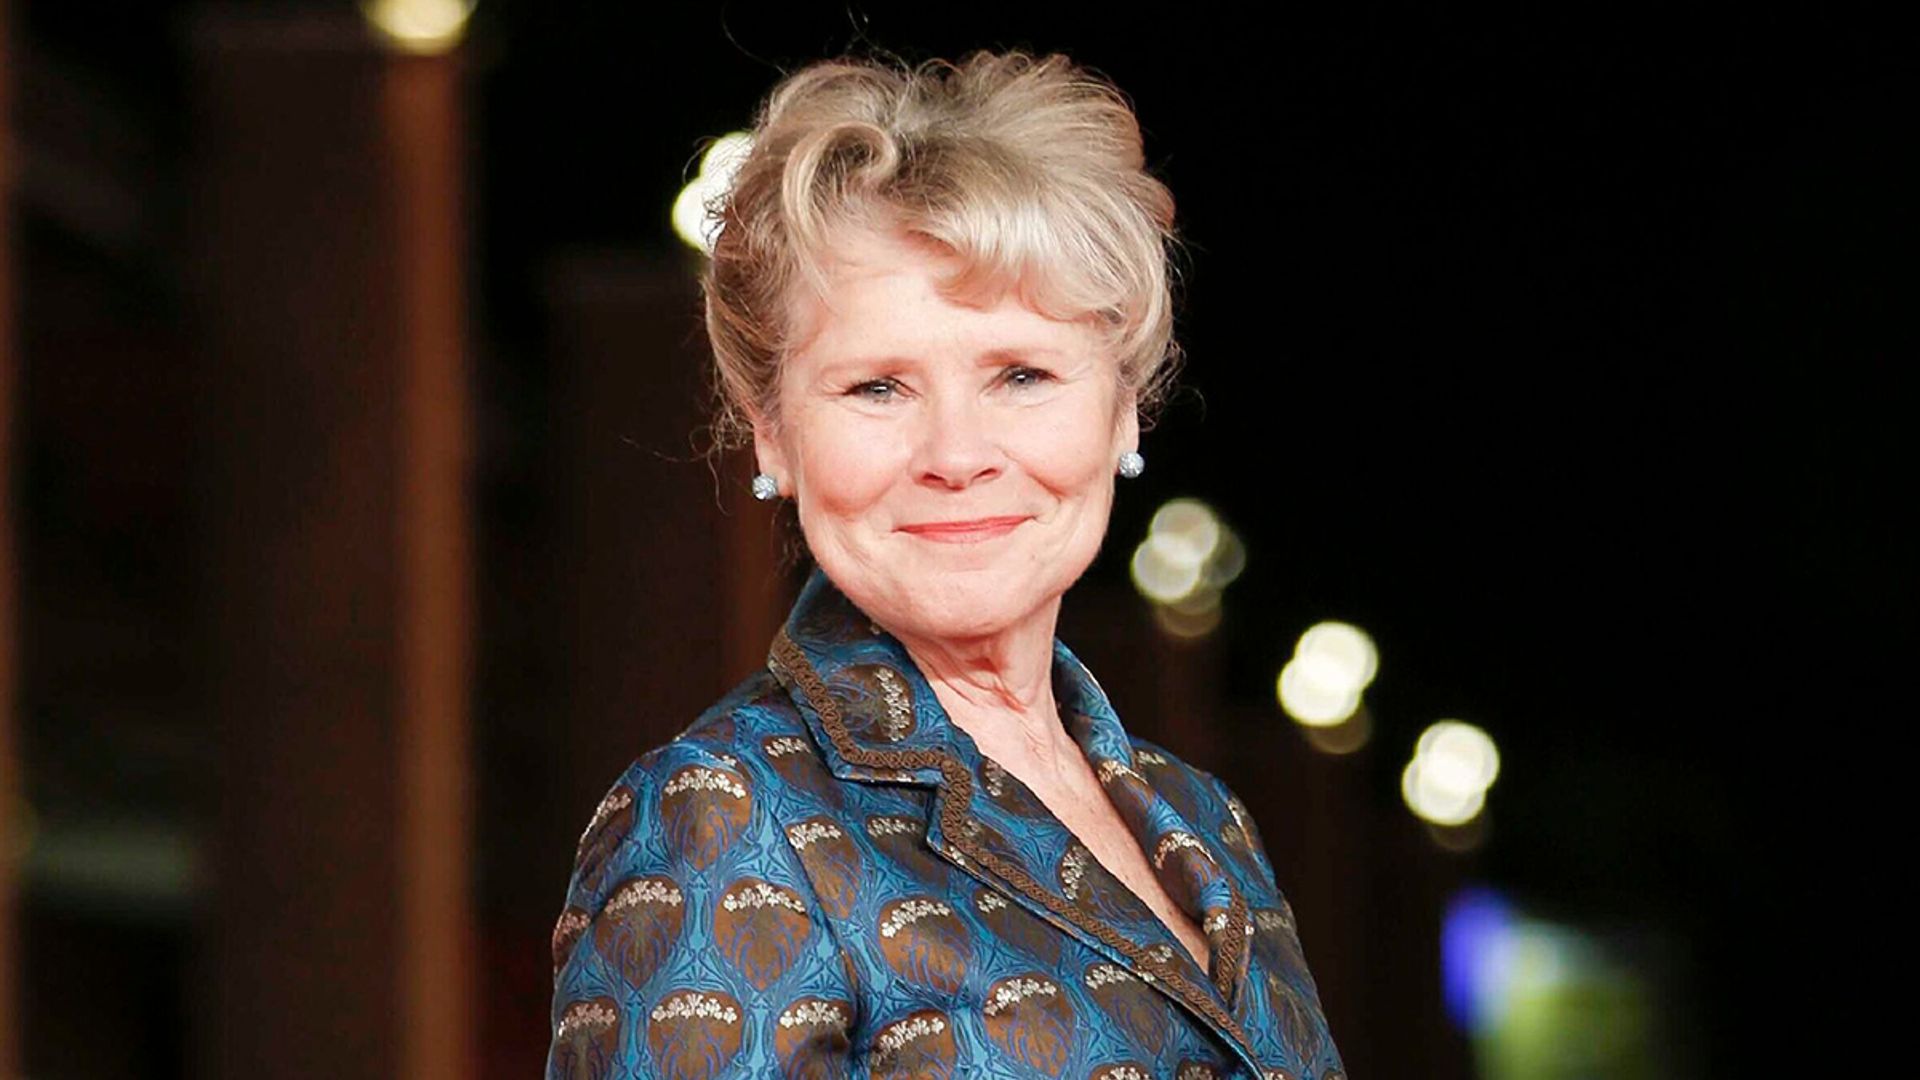 Imelda Staunton's first appearance in The Crown isn't any time soon - find out why